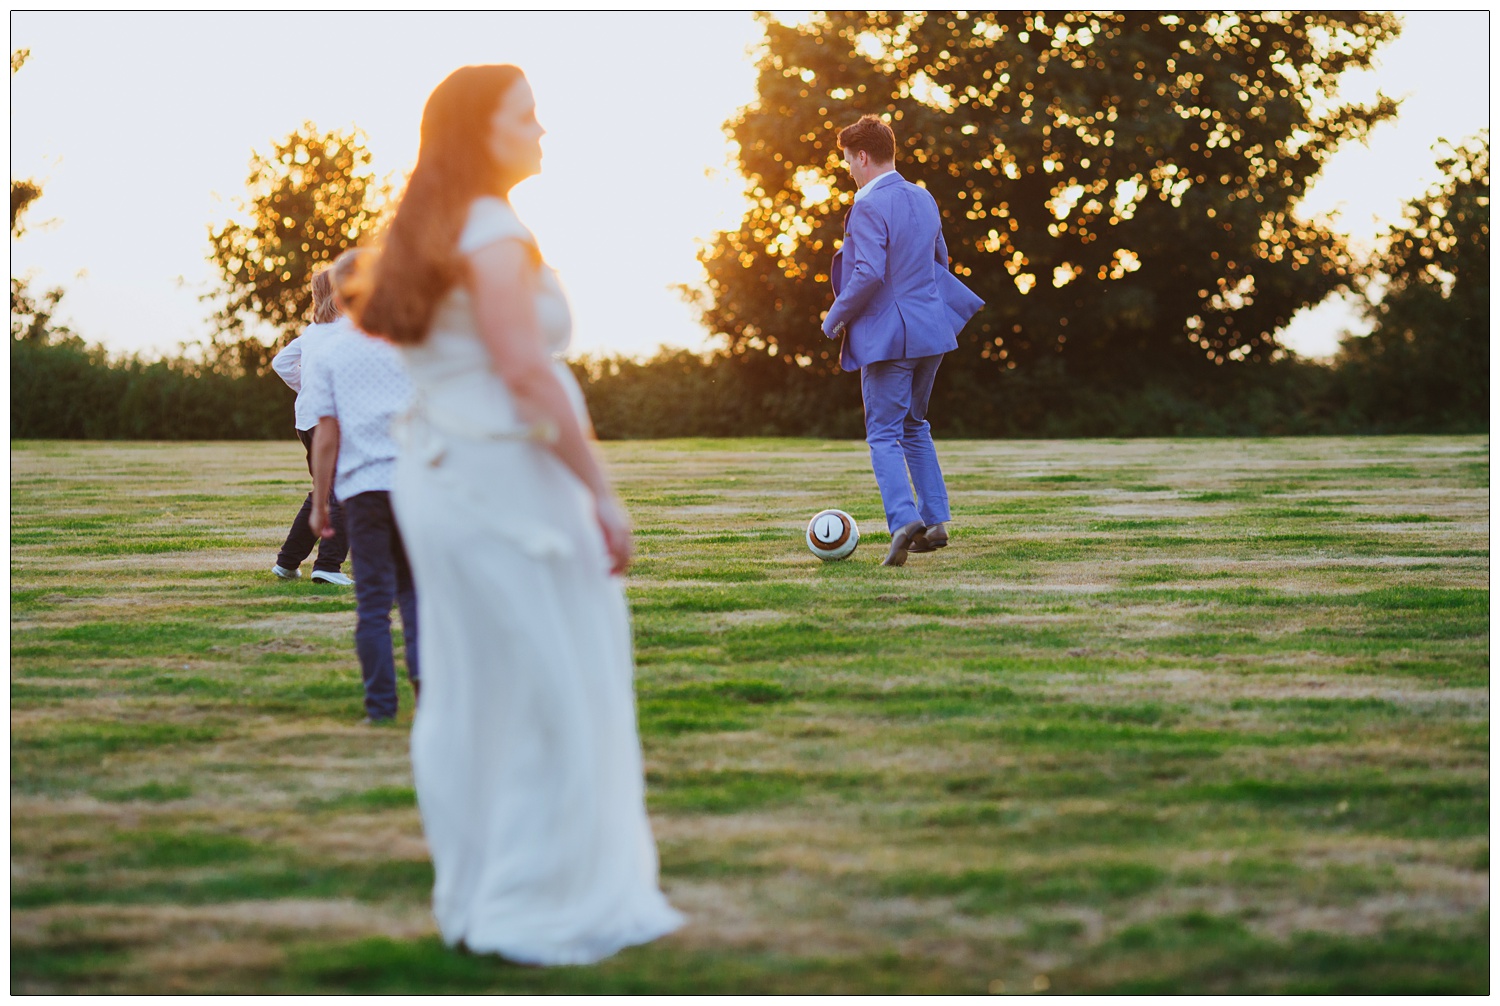 Groom in a pale blue Zara suit playing football in a field. The sun is setting and the bride is in the foreground.